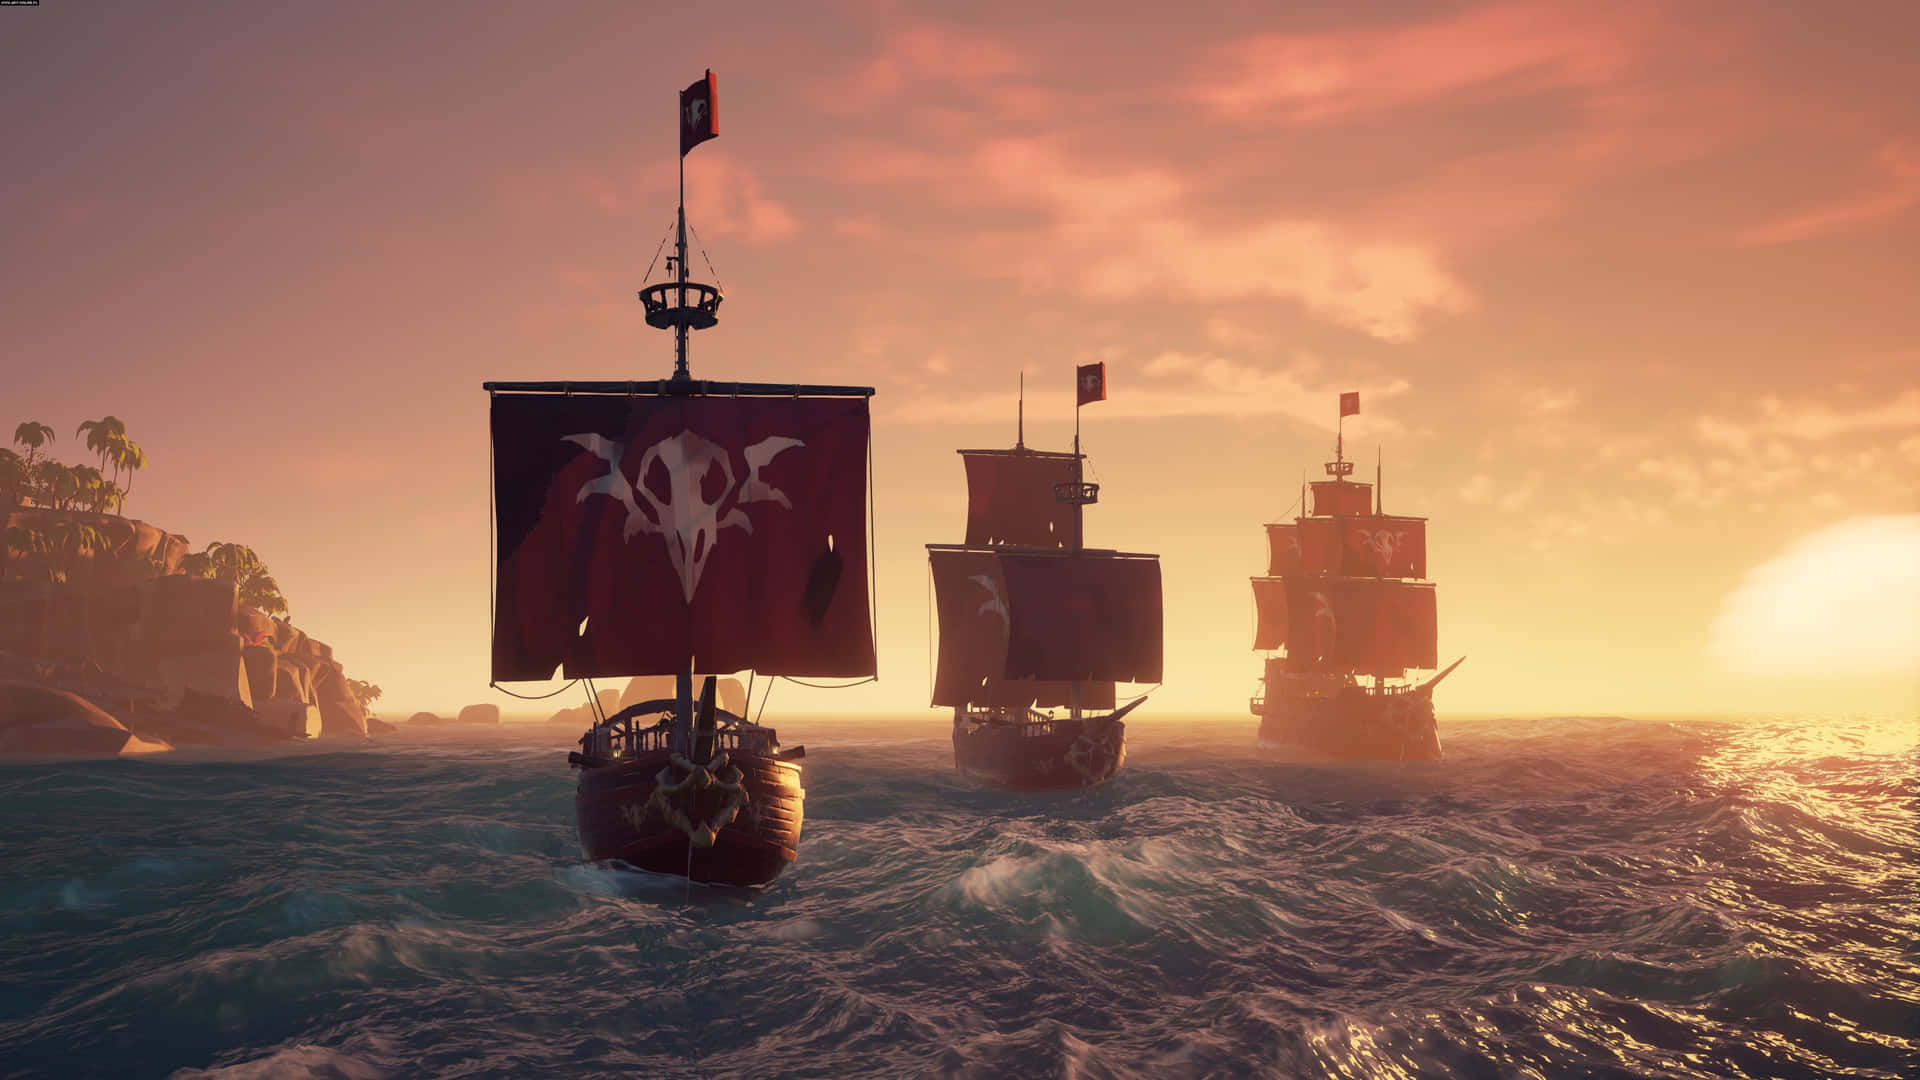 Epic adventure awaits in Sea of Thieves